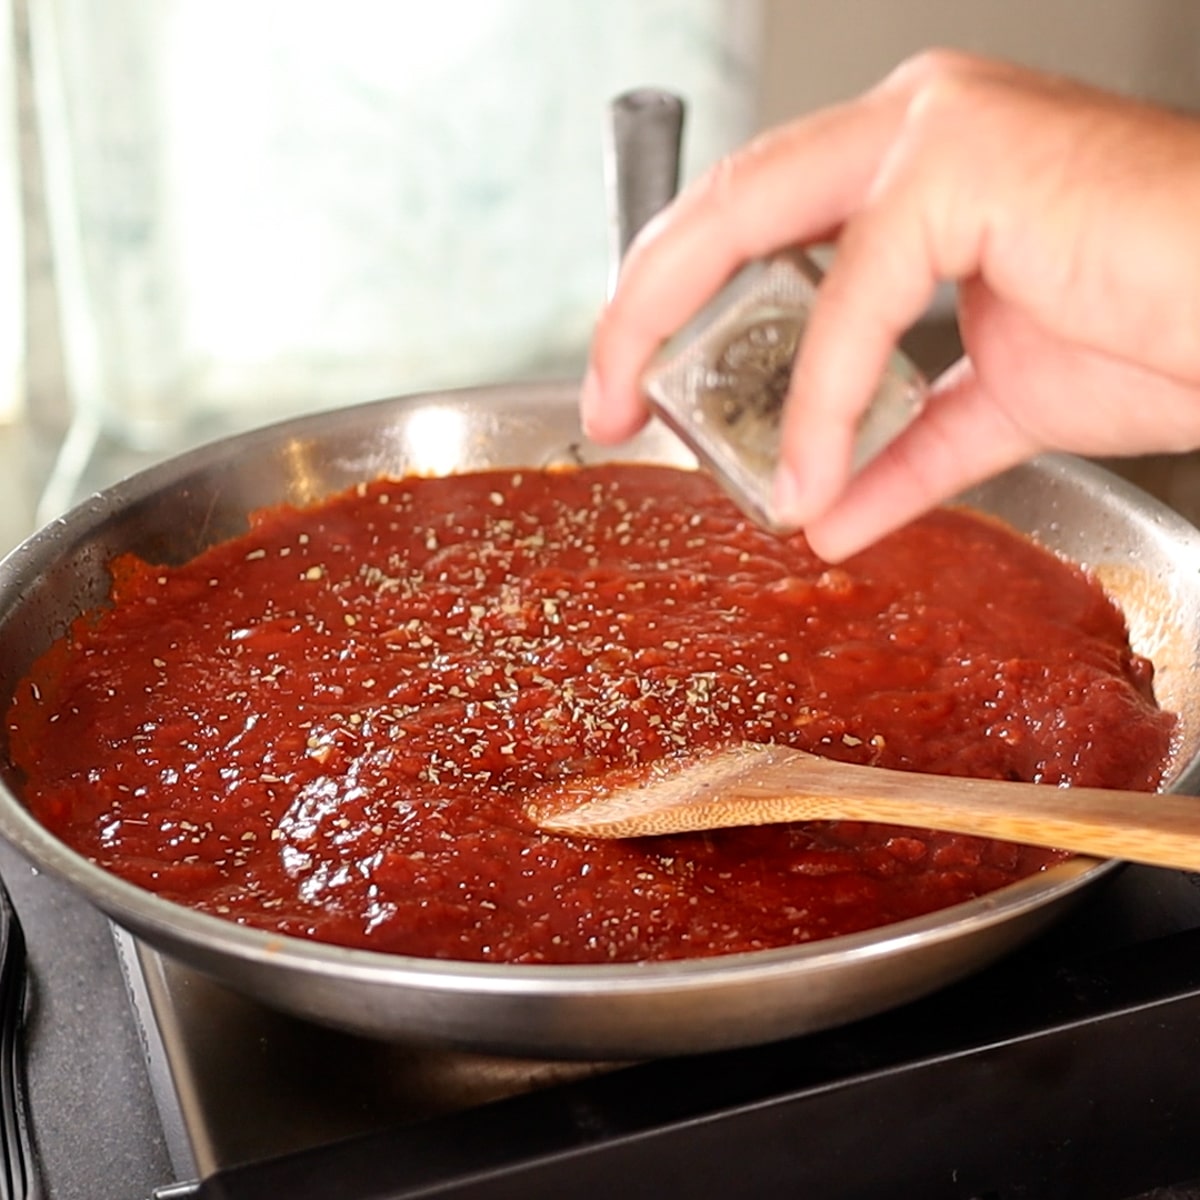 making a meat sauce in a frying pan